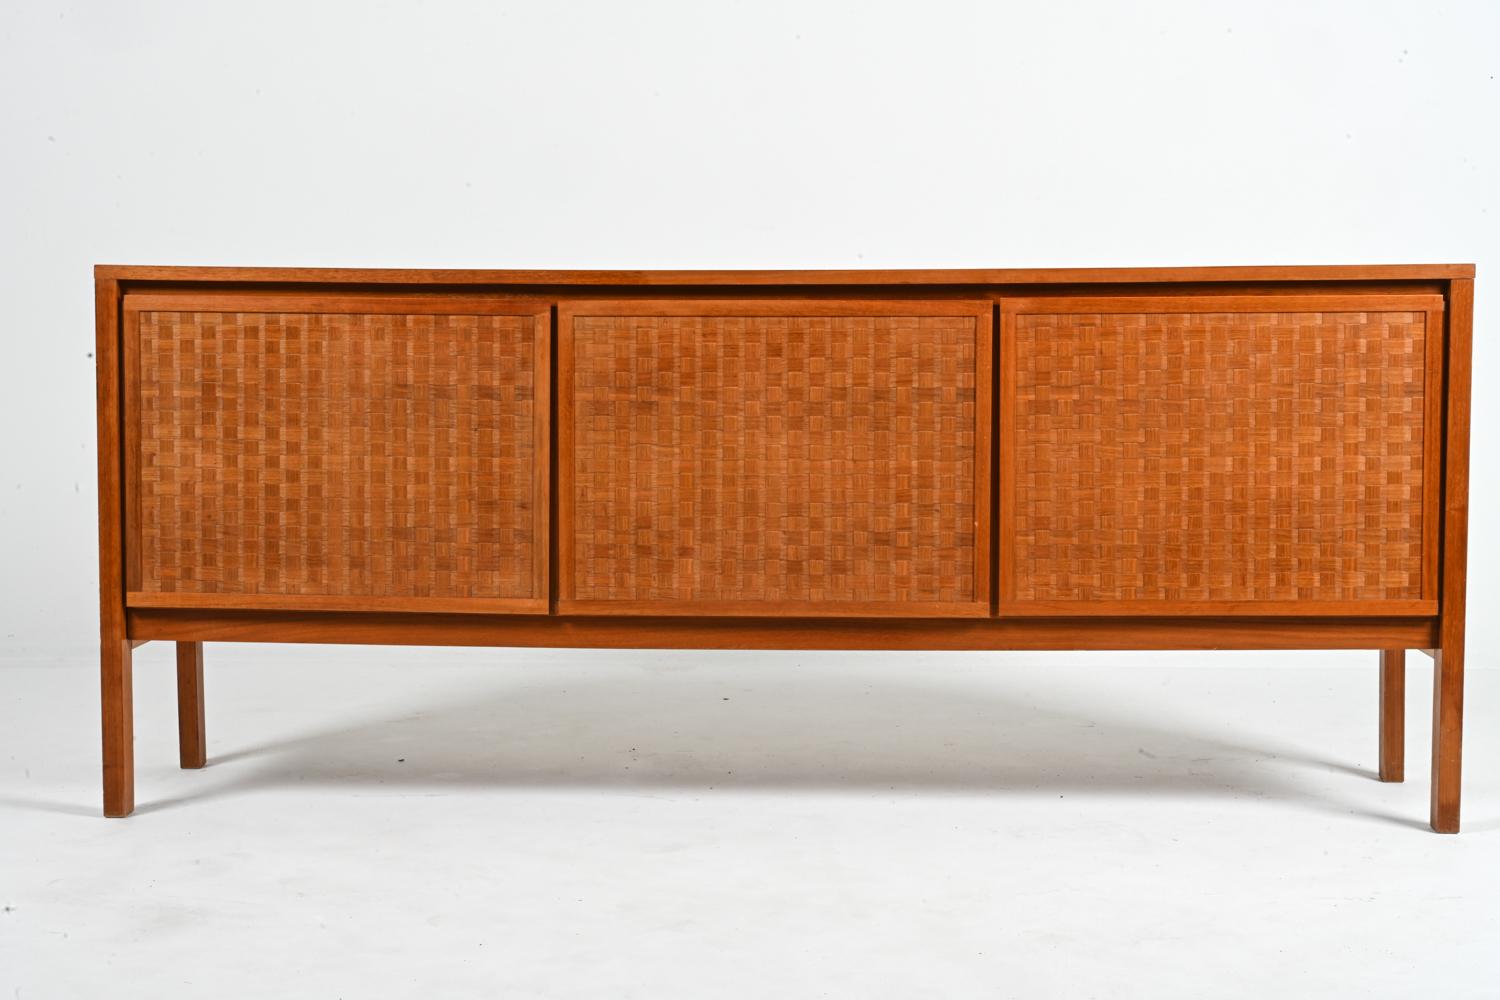 German Mid-Century Teak Woven-Front Sideboard by Leo Bub, c. 1960 In Good Condition For Sale In Norwalk, CT